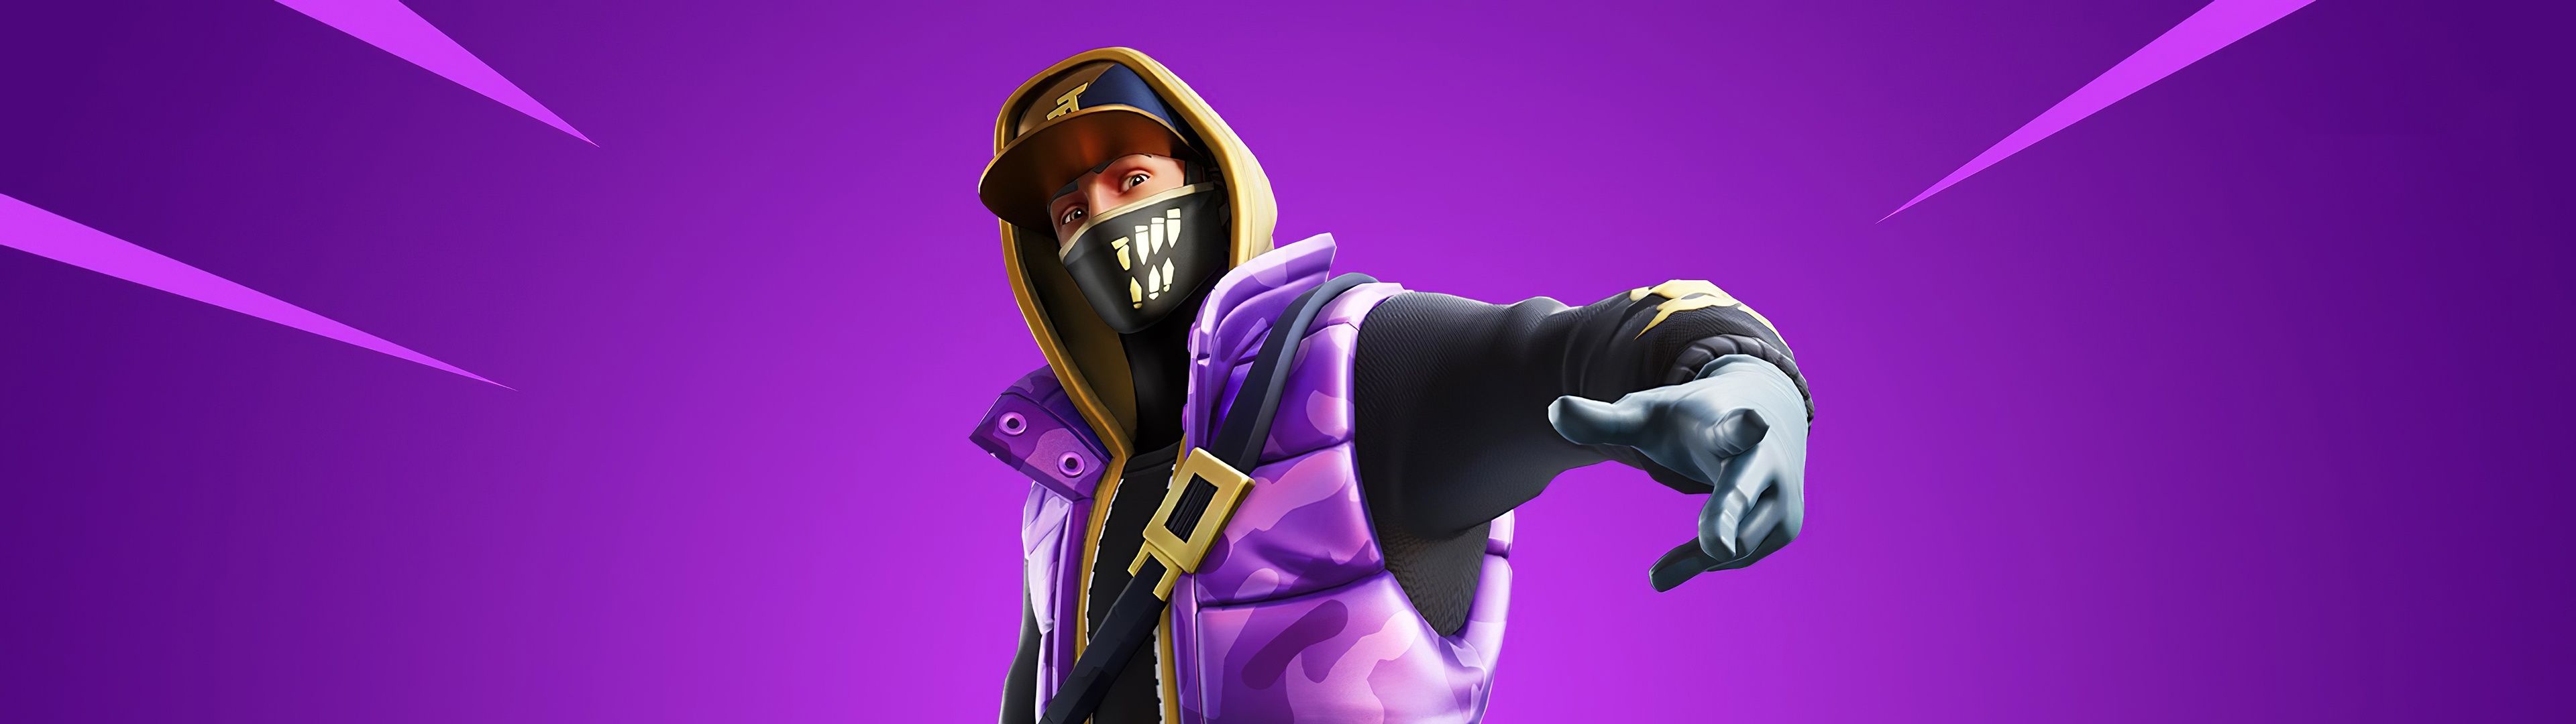 Fortnite character in a purple jacket pointing to the right - Fortnite